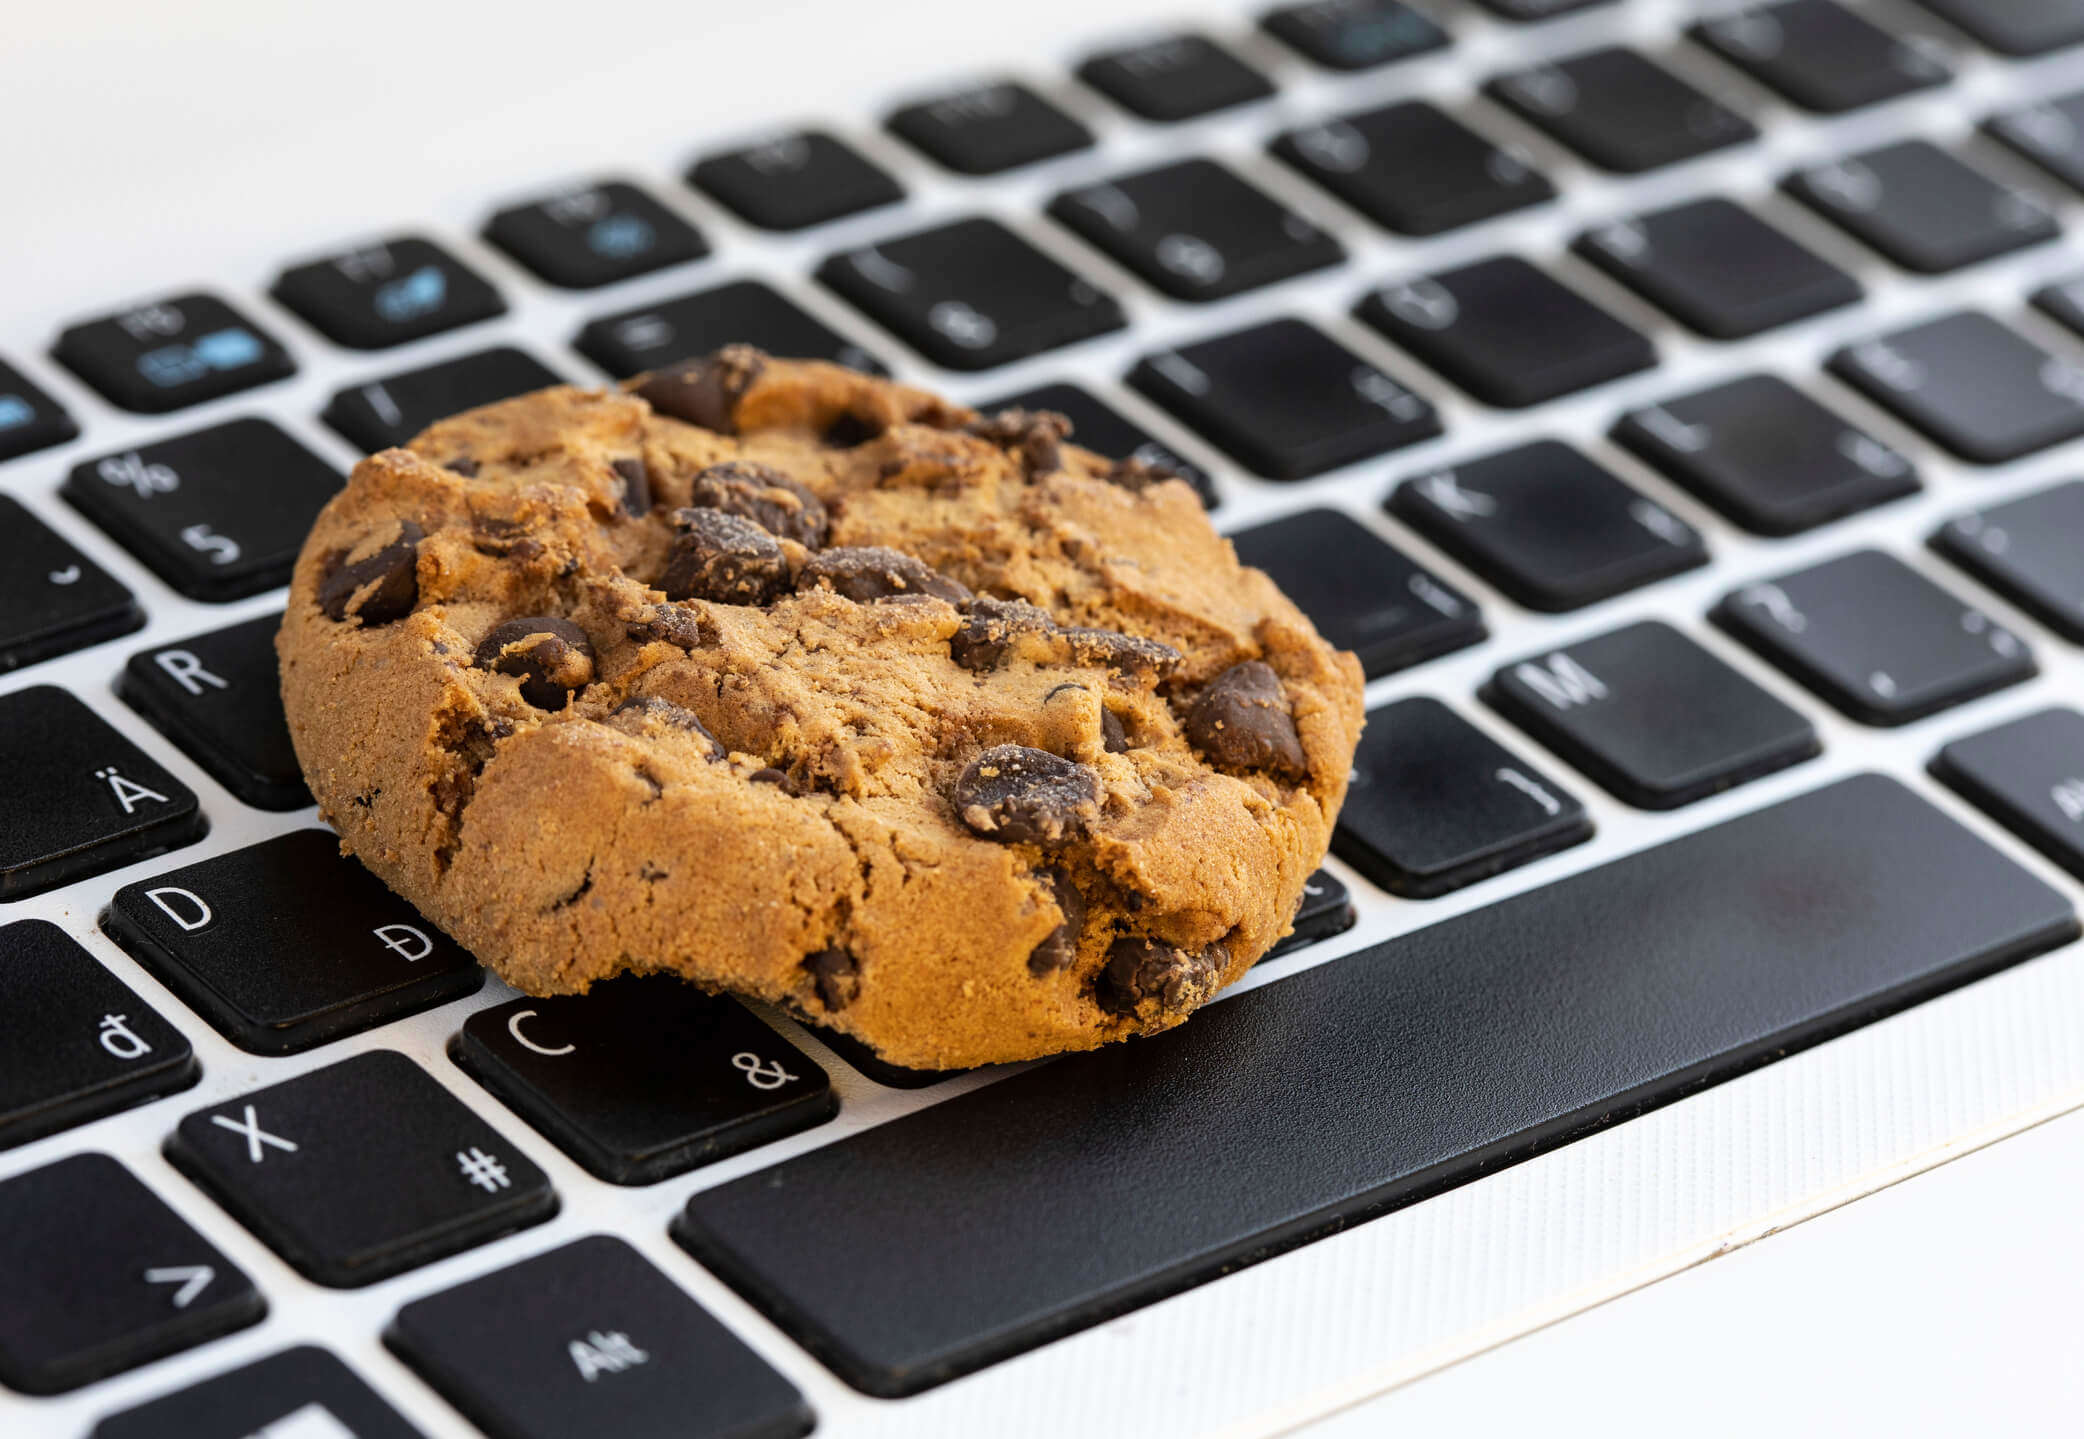 A cookie on a computer keyboard